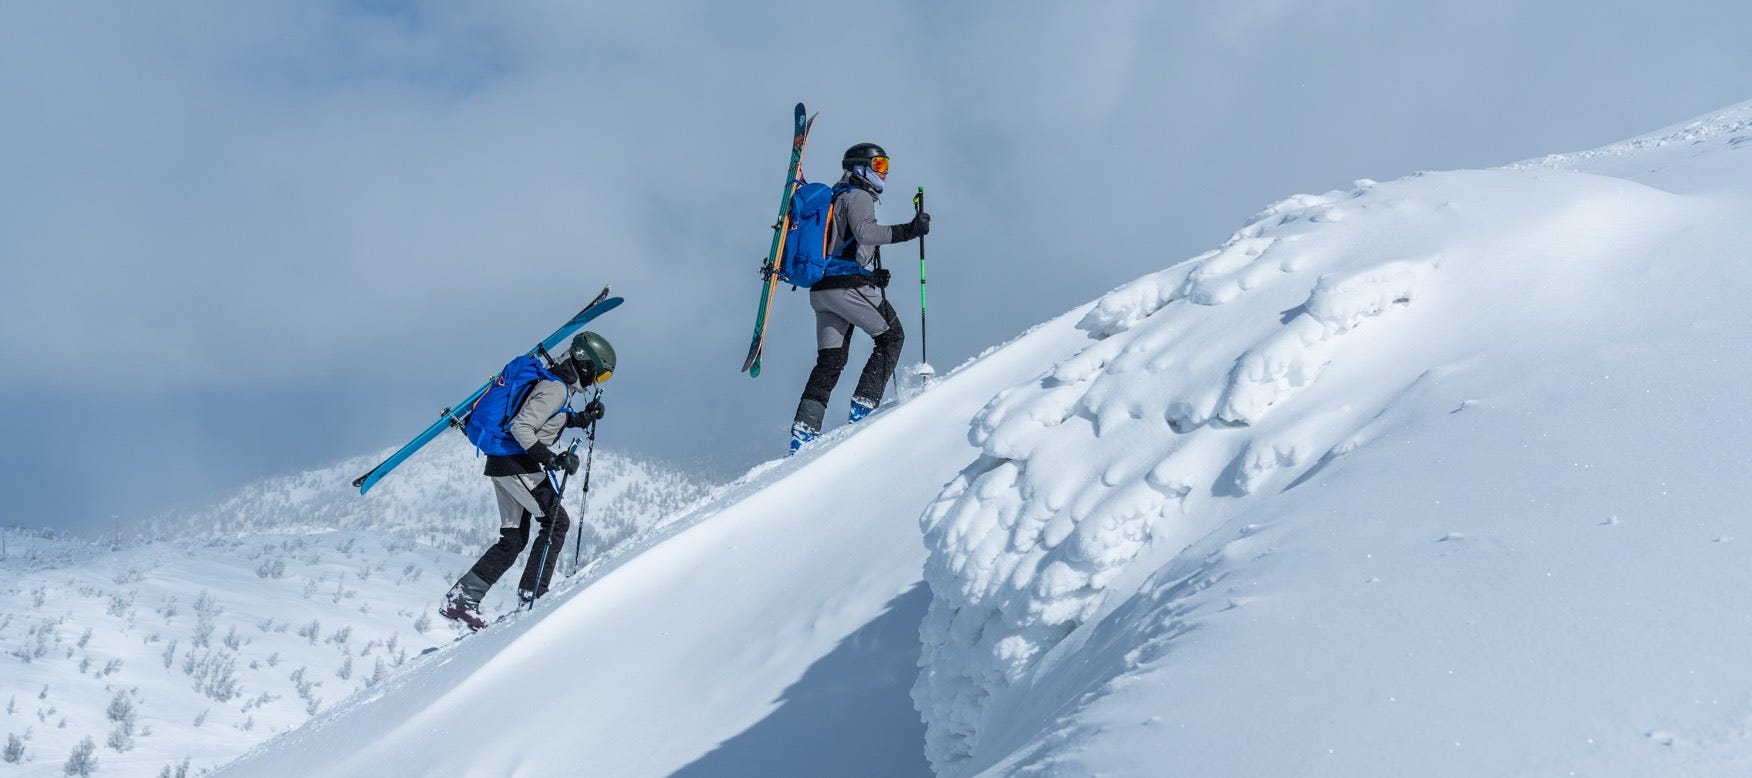 Man and woman ascending a snowy mountain with skis and backpack